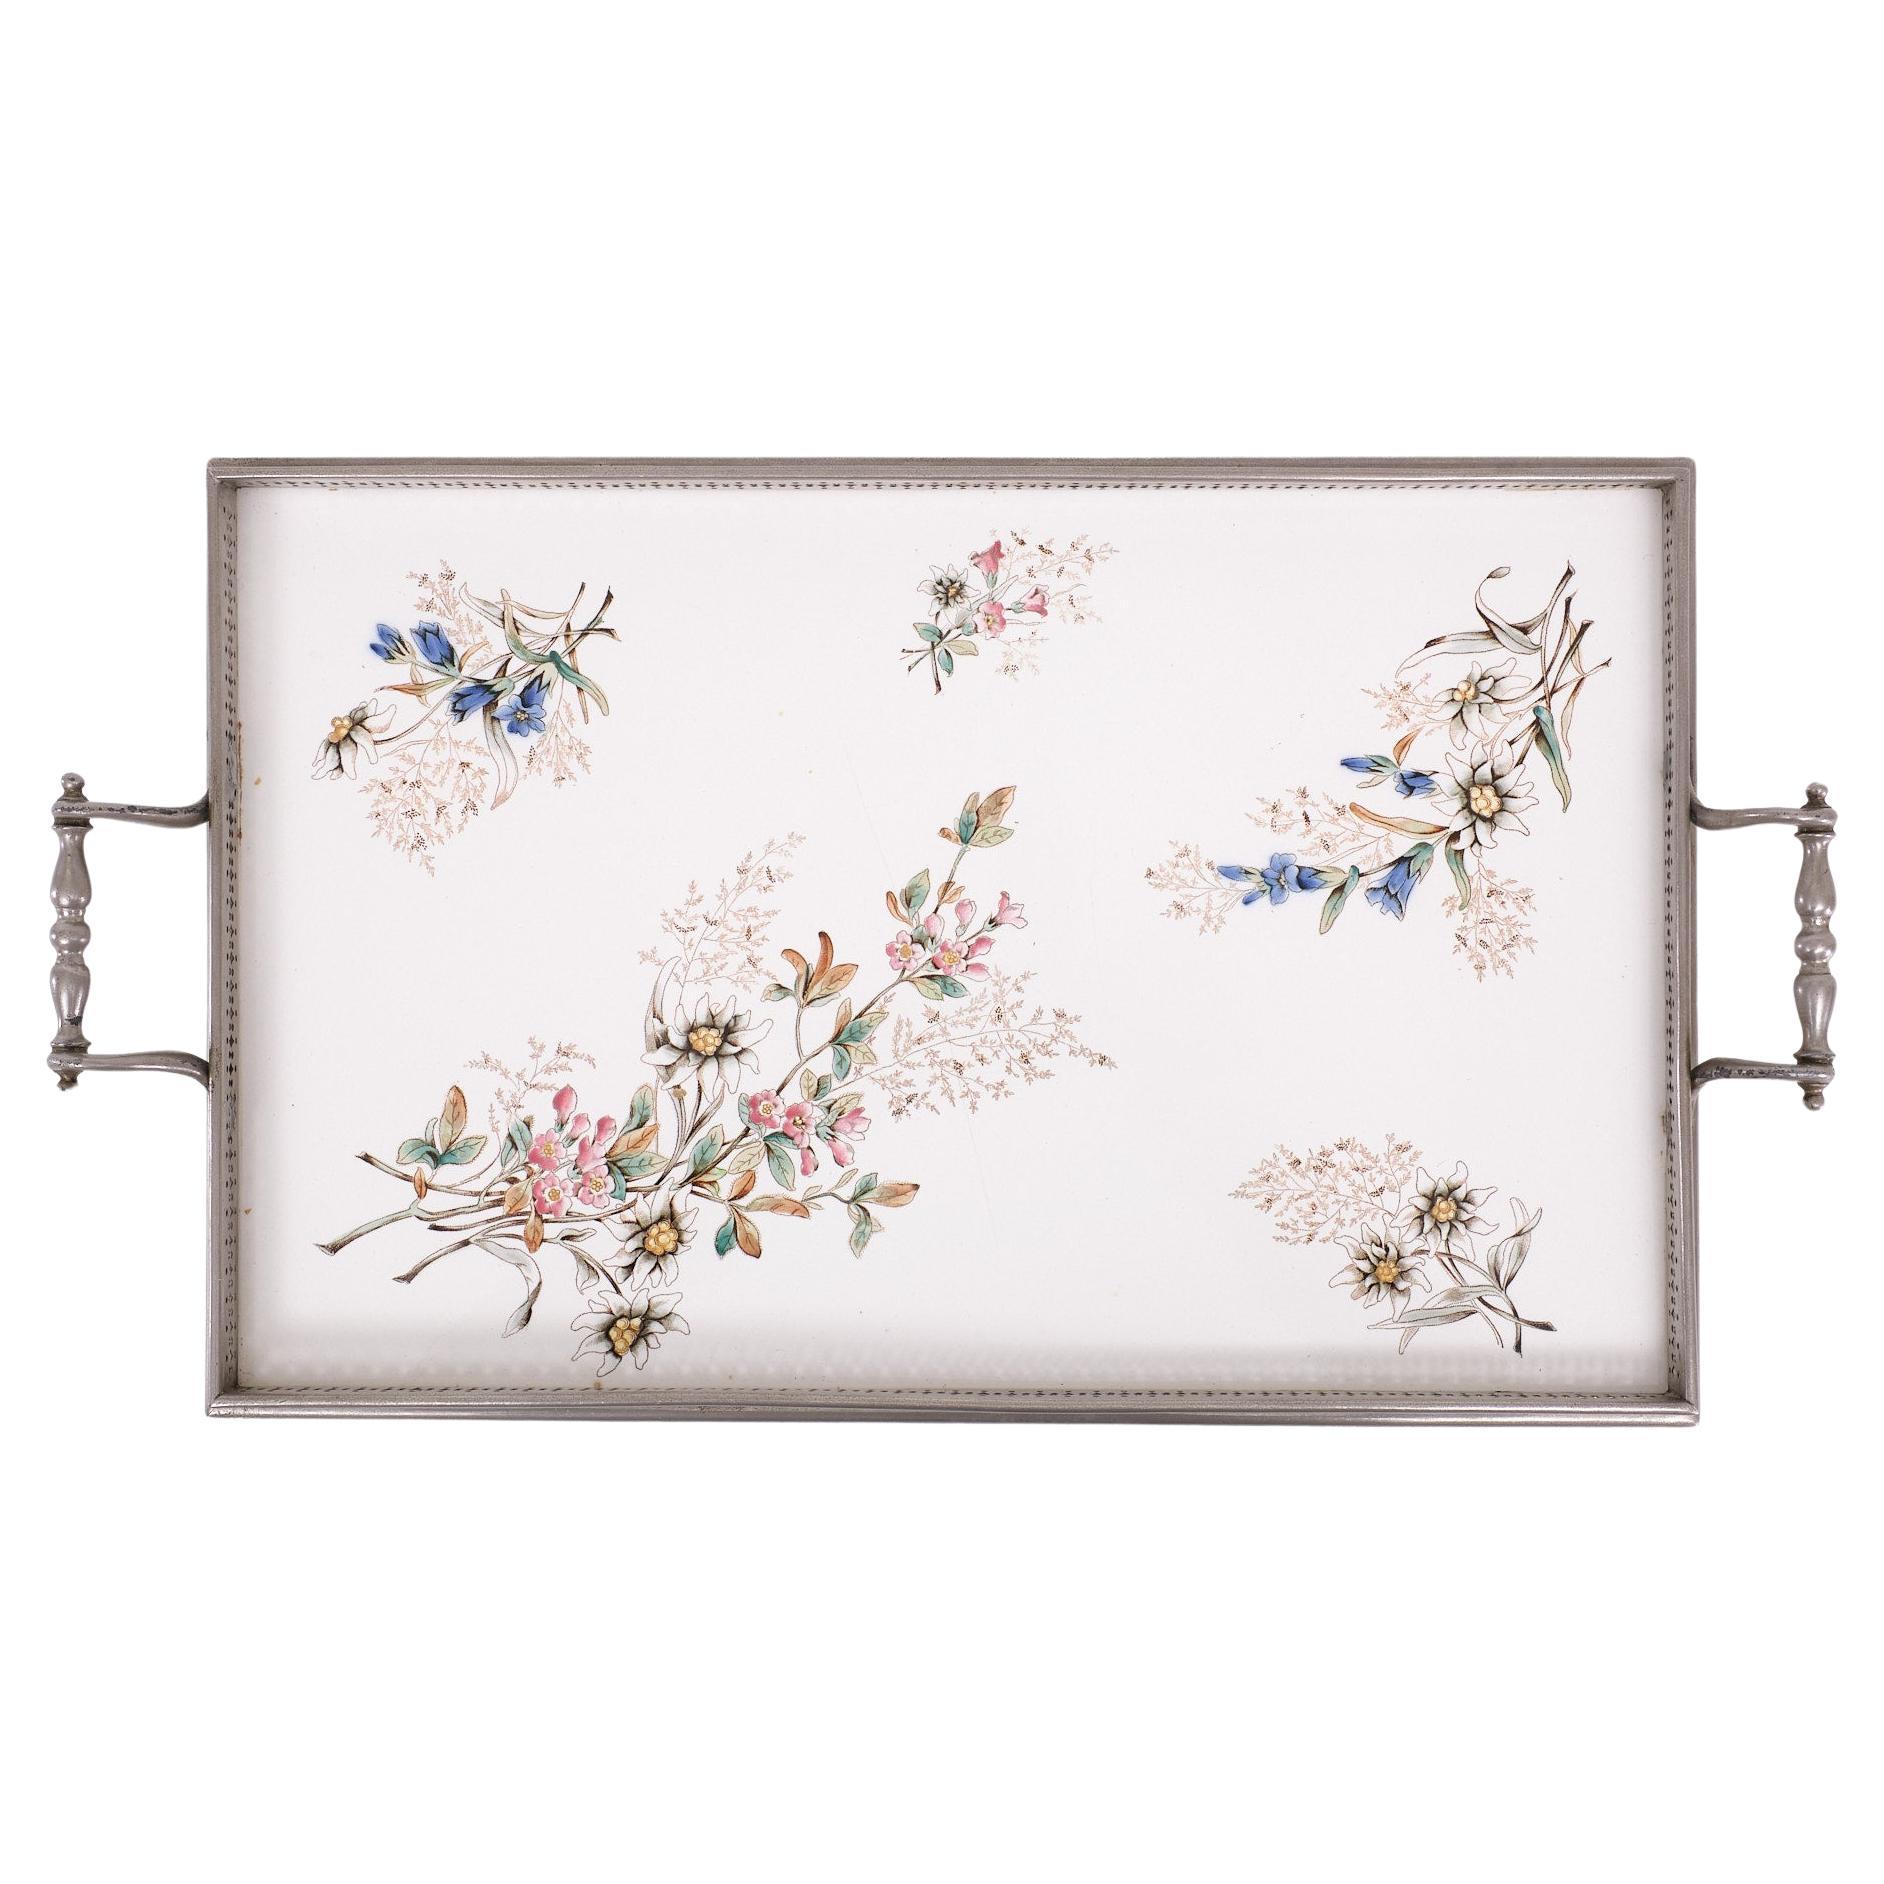 Very nice Porcelain serving tray .Decorated with Flowers .Standing  on 
White Metal feet . And hand grips . So elegant 